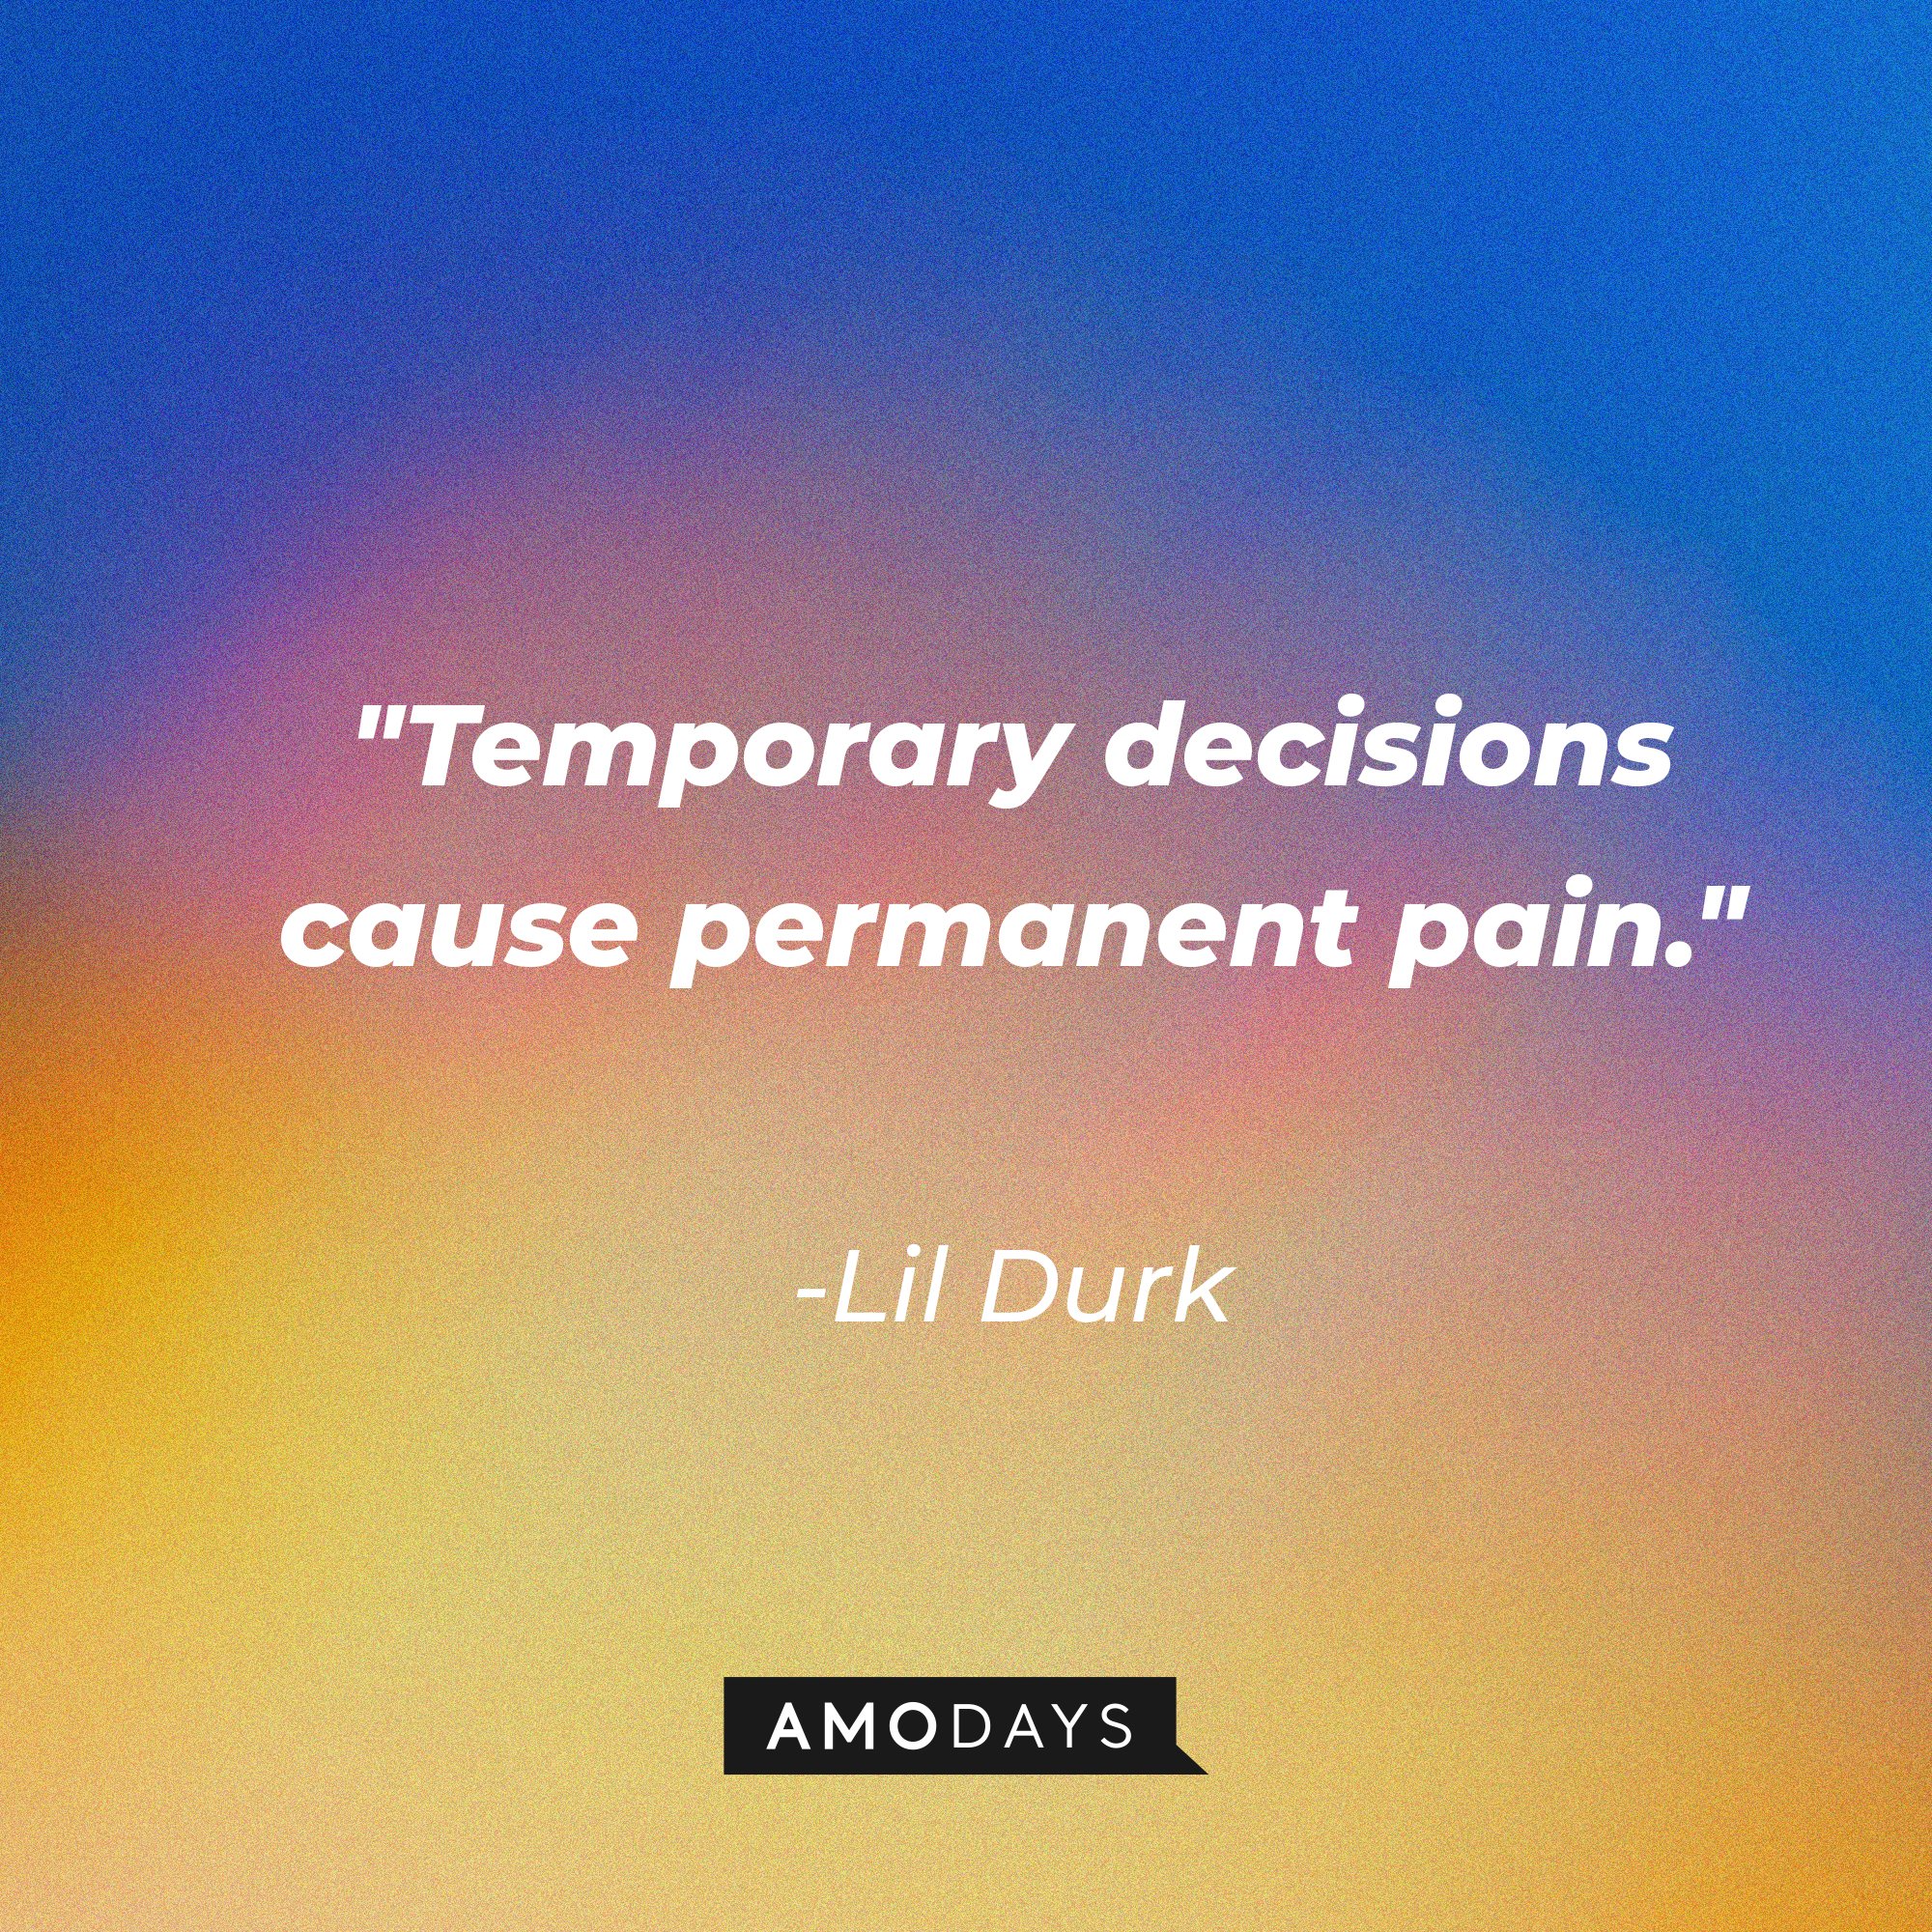 Lil Durk’s quote: "Temporary decisions cause permanent pain." | Image: AmoDays 